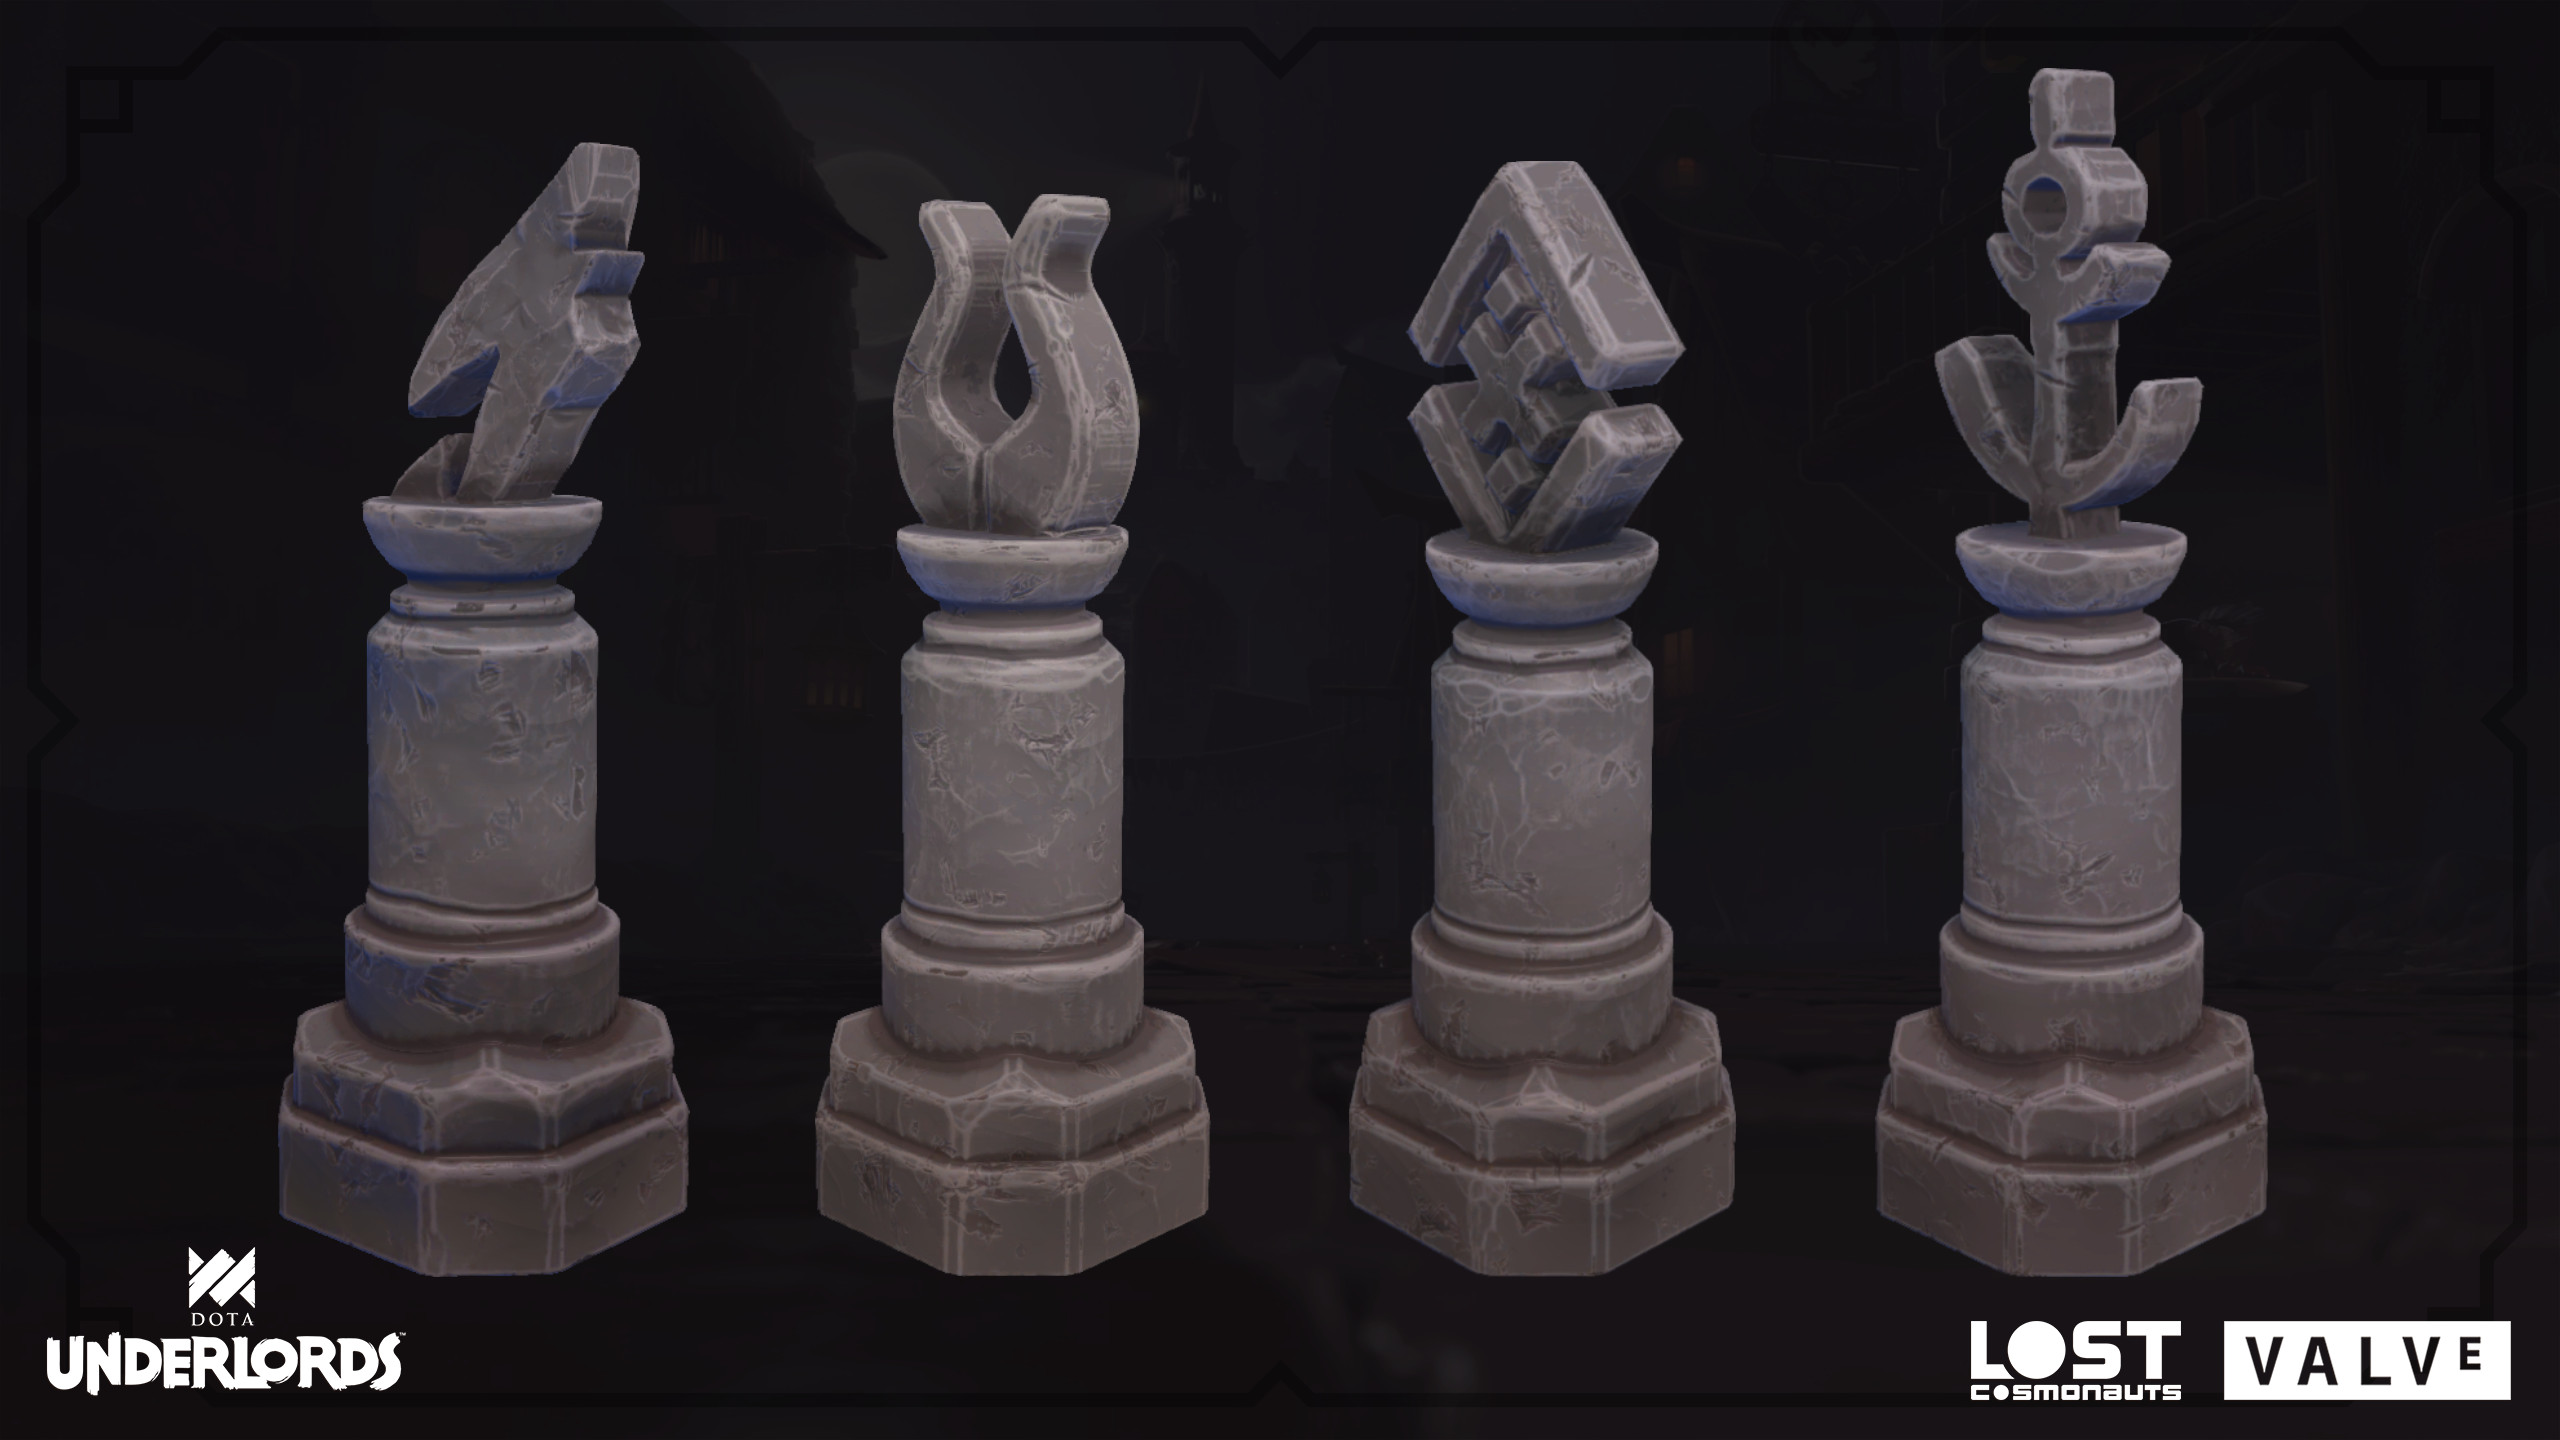 Underlord Markers
Design by Alfred Khamidullin.
Modeling by Alfred Khamidullin and Me.
Sculpting by Denis Varchulik and Me.
Texturing by Me.